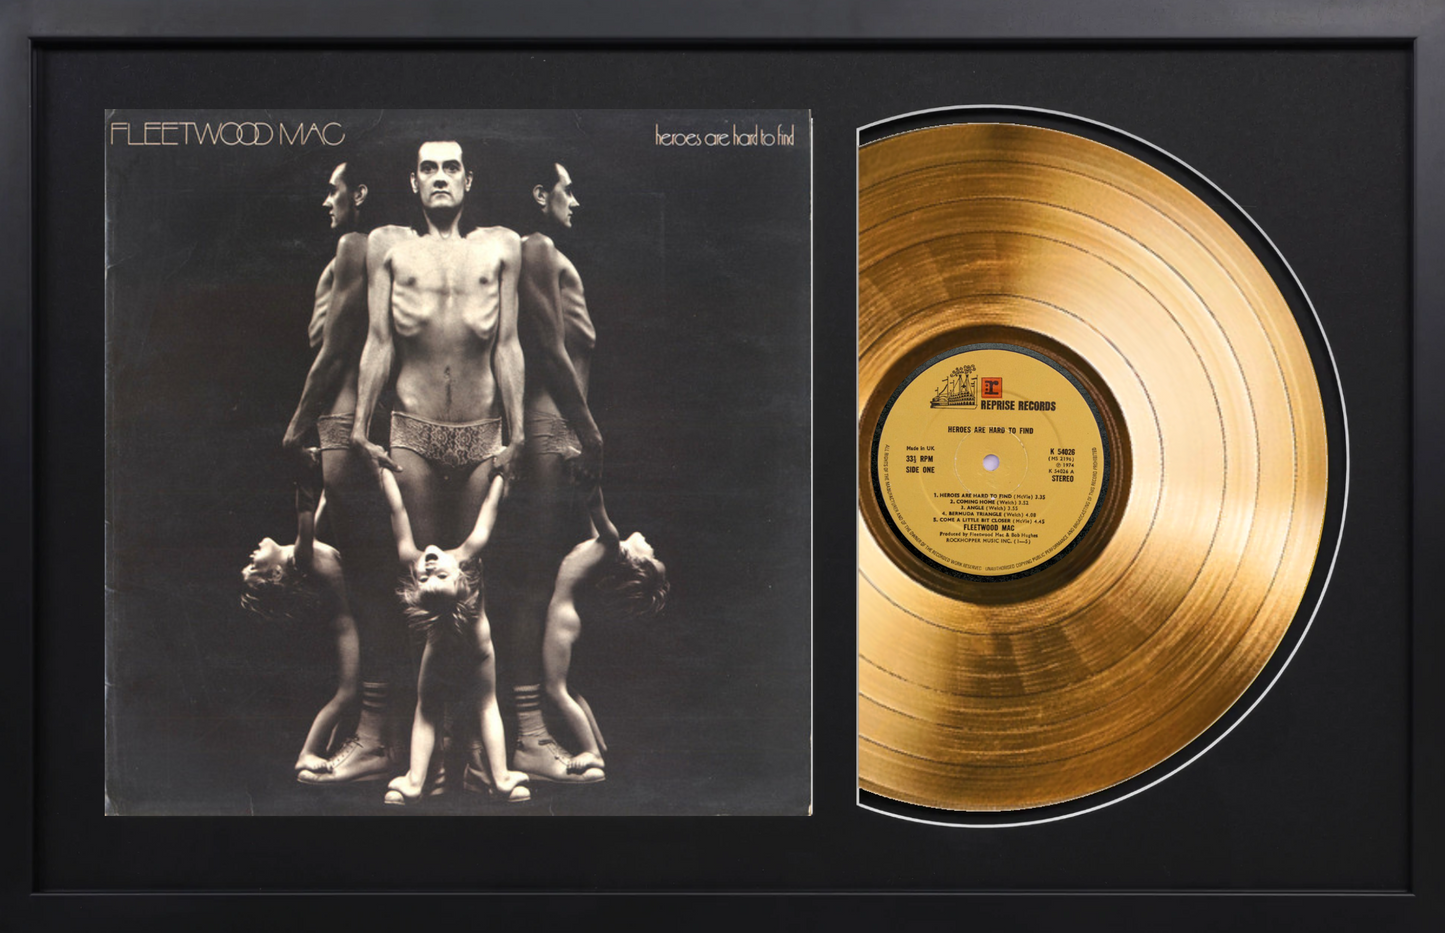 Fleetwood Mac - Heroes Are Hard to Find - 14K Gold Plated Vinyl